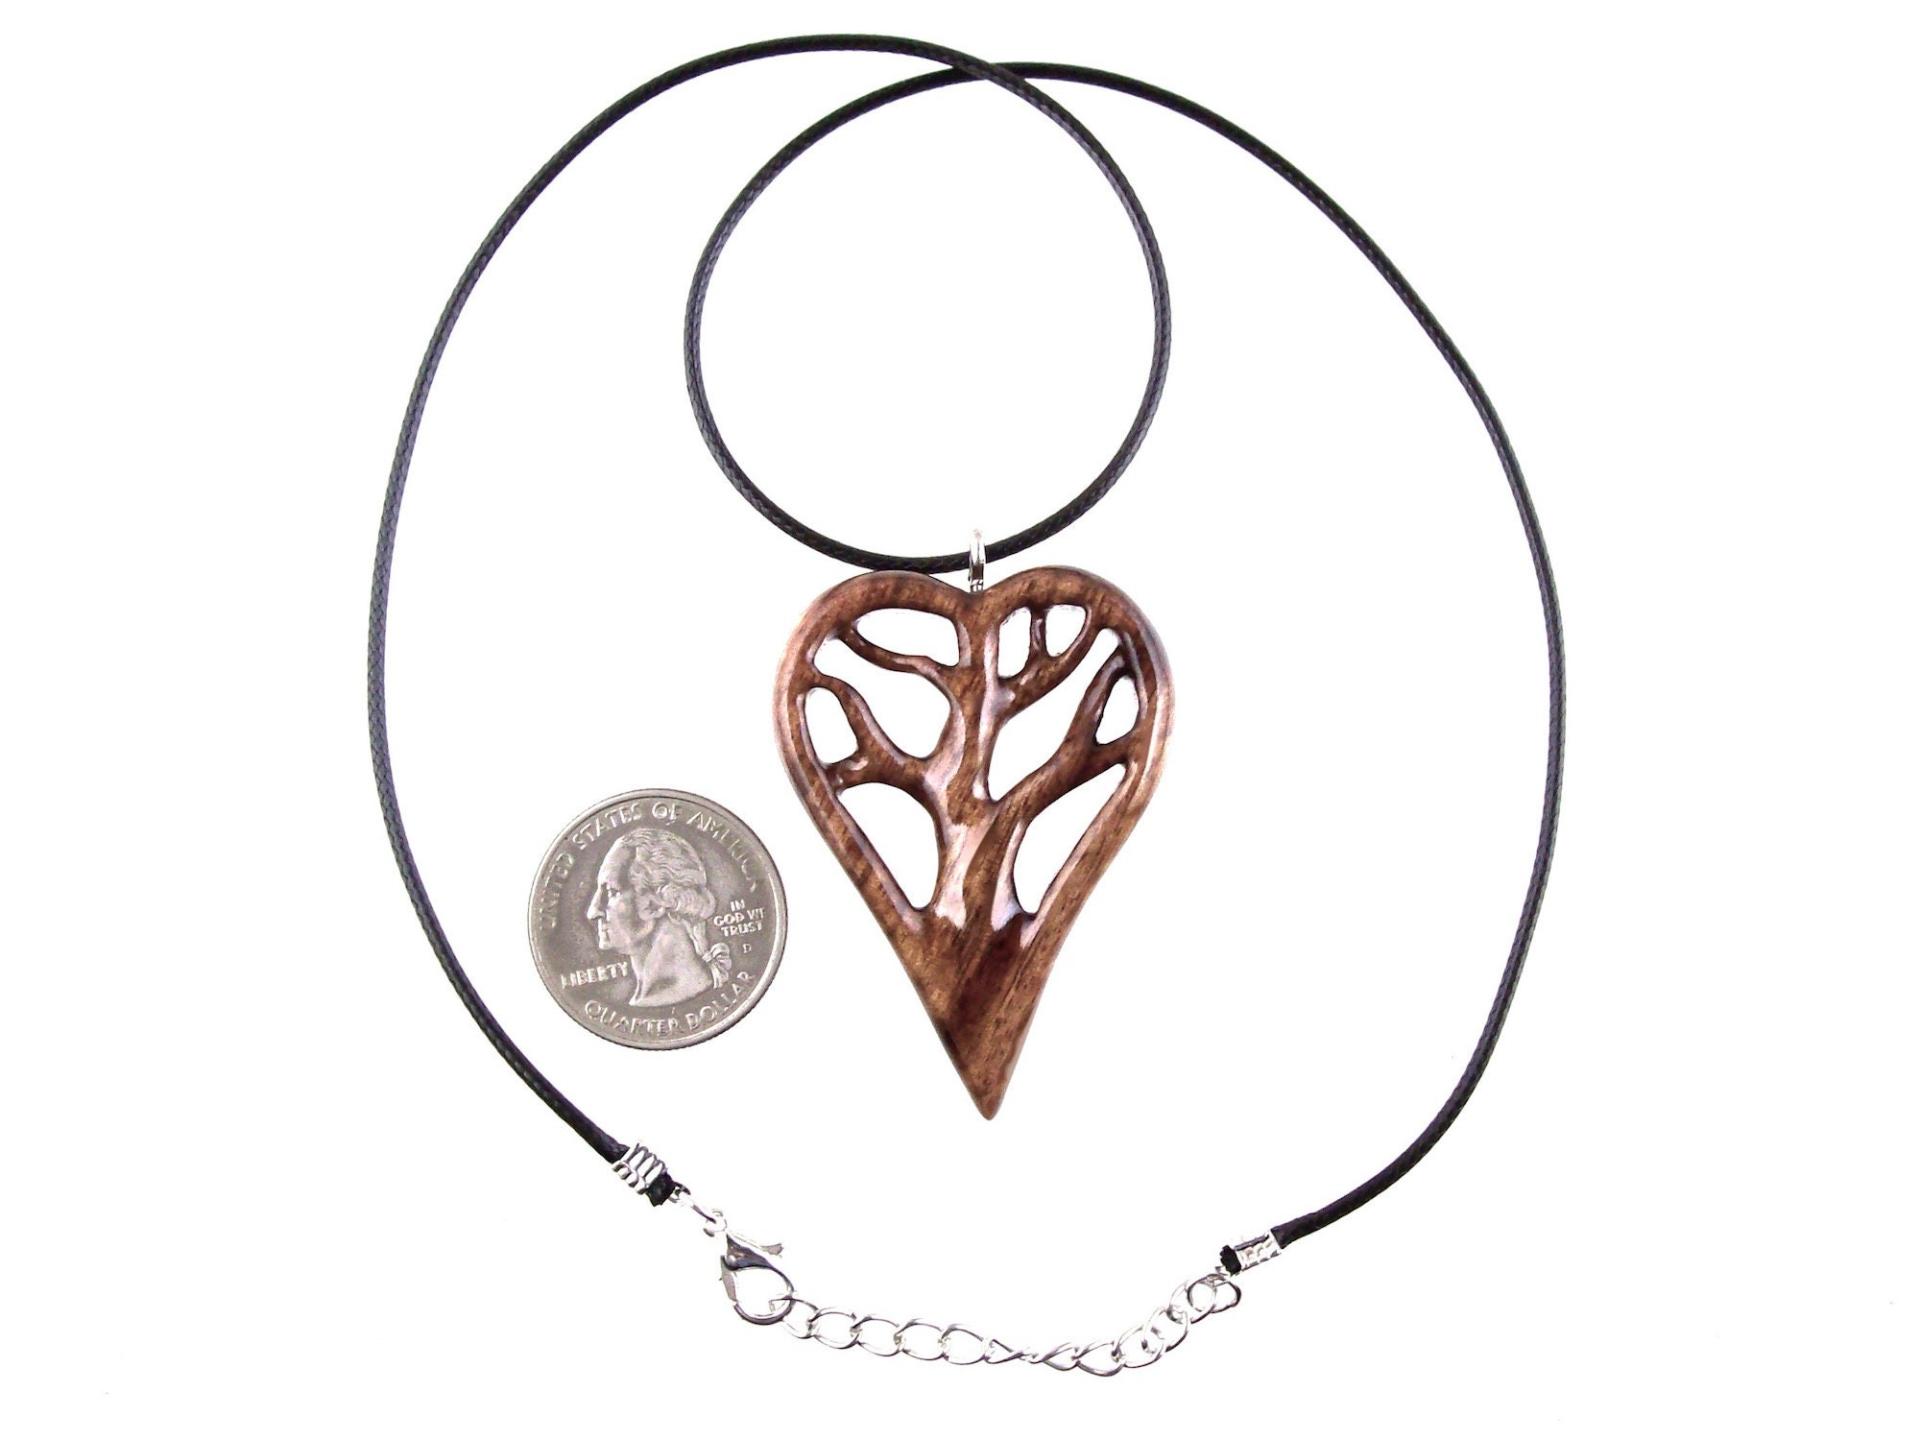 Wooden Heart Pendant, Hand Carved Tree of Life Necklace, Wood Heart Jewelry, One of a Kind 5th Anniversary Gift for Her